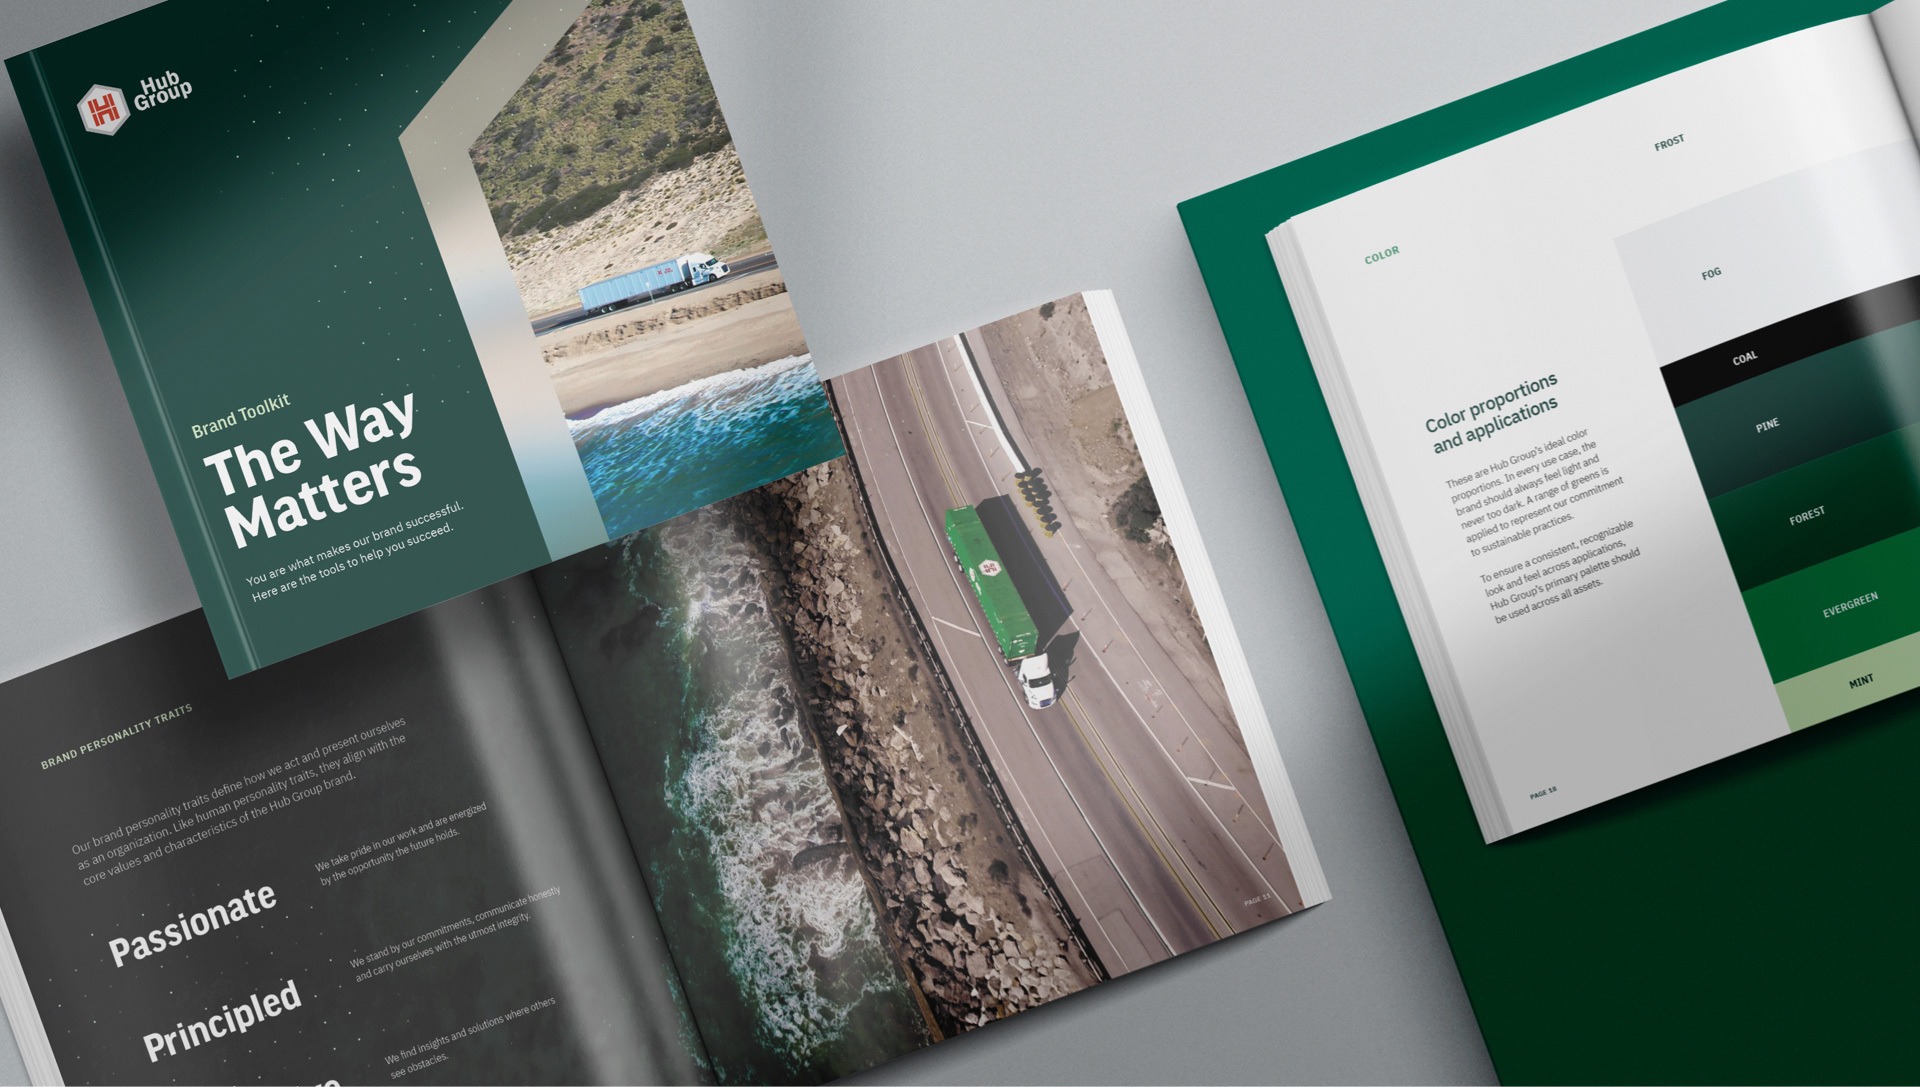 Mockup of Hub Group physical brand guidelines book